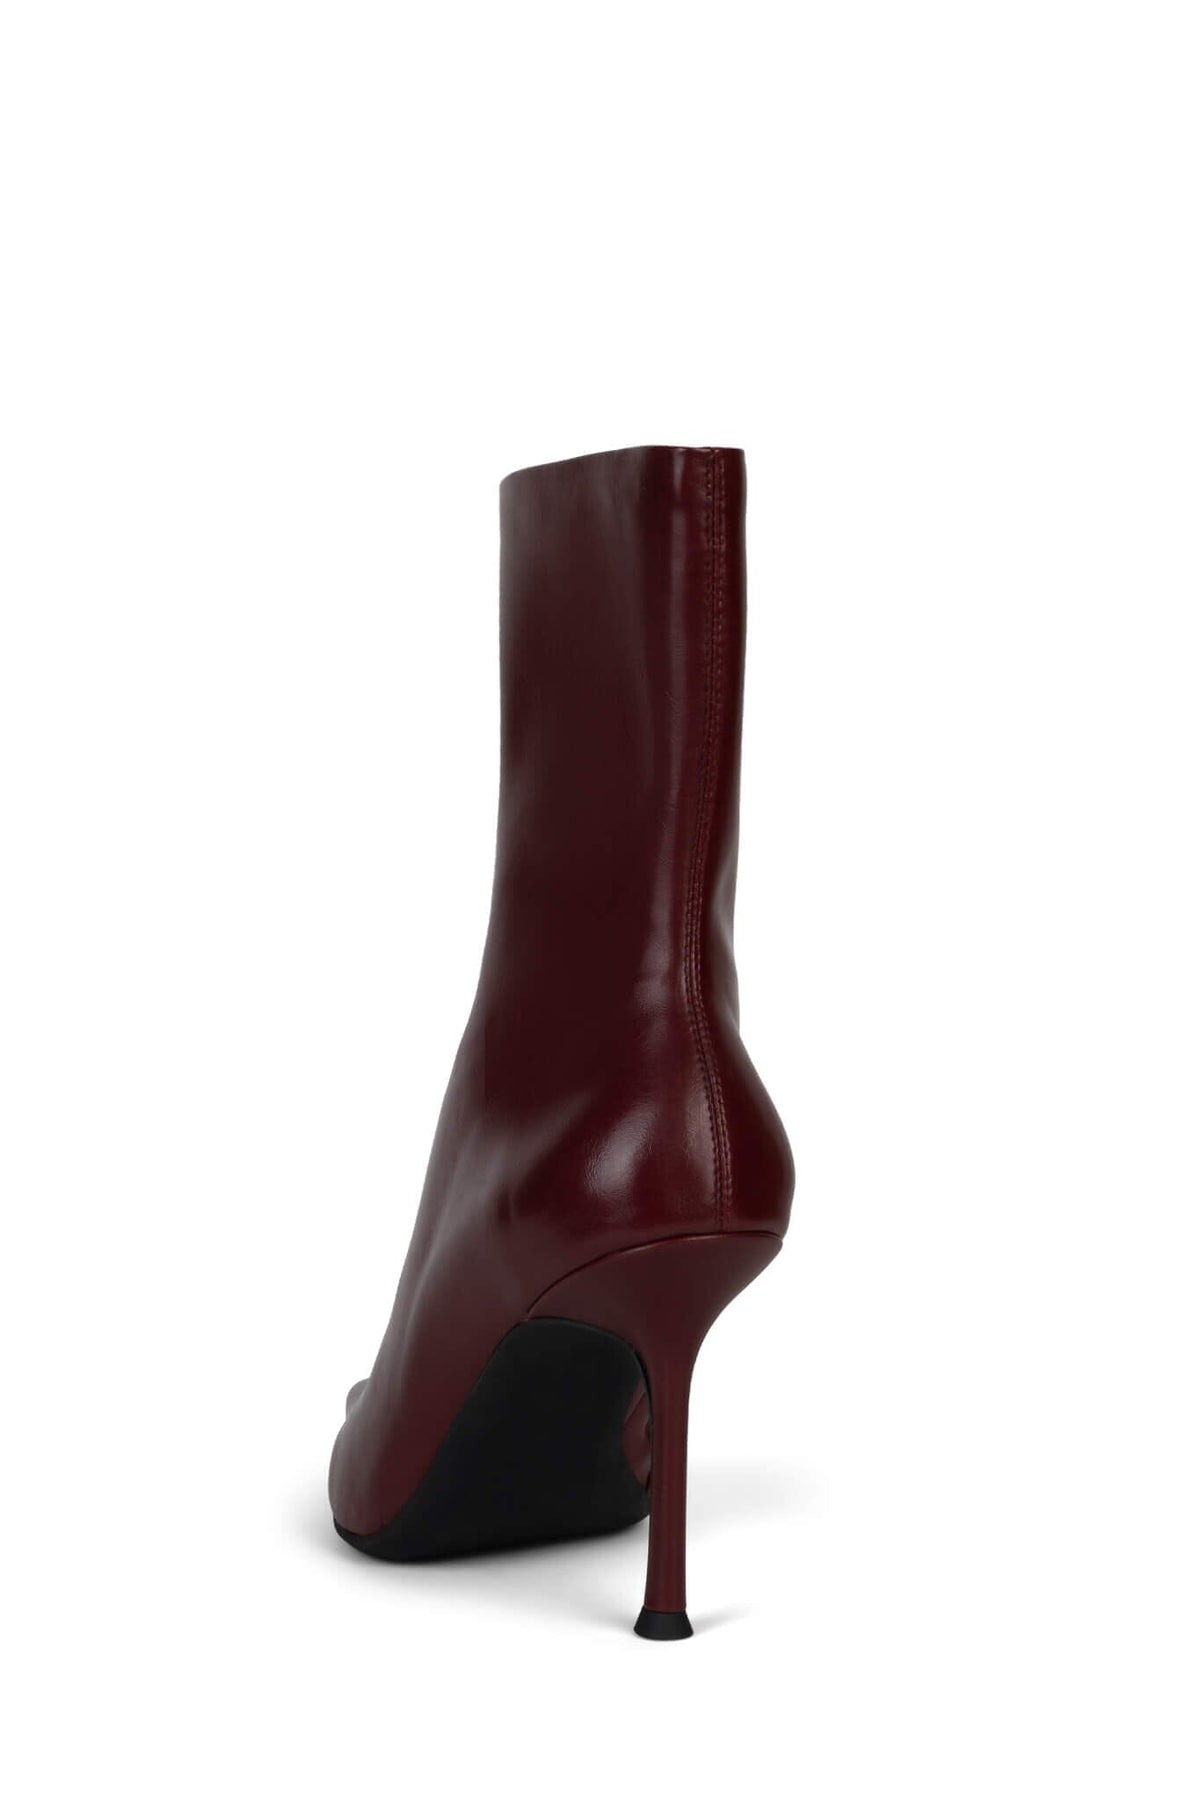 DARING Jeffrey Campbell Ankle Booties YYH Wine 